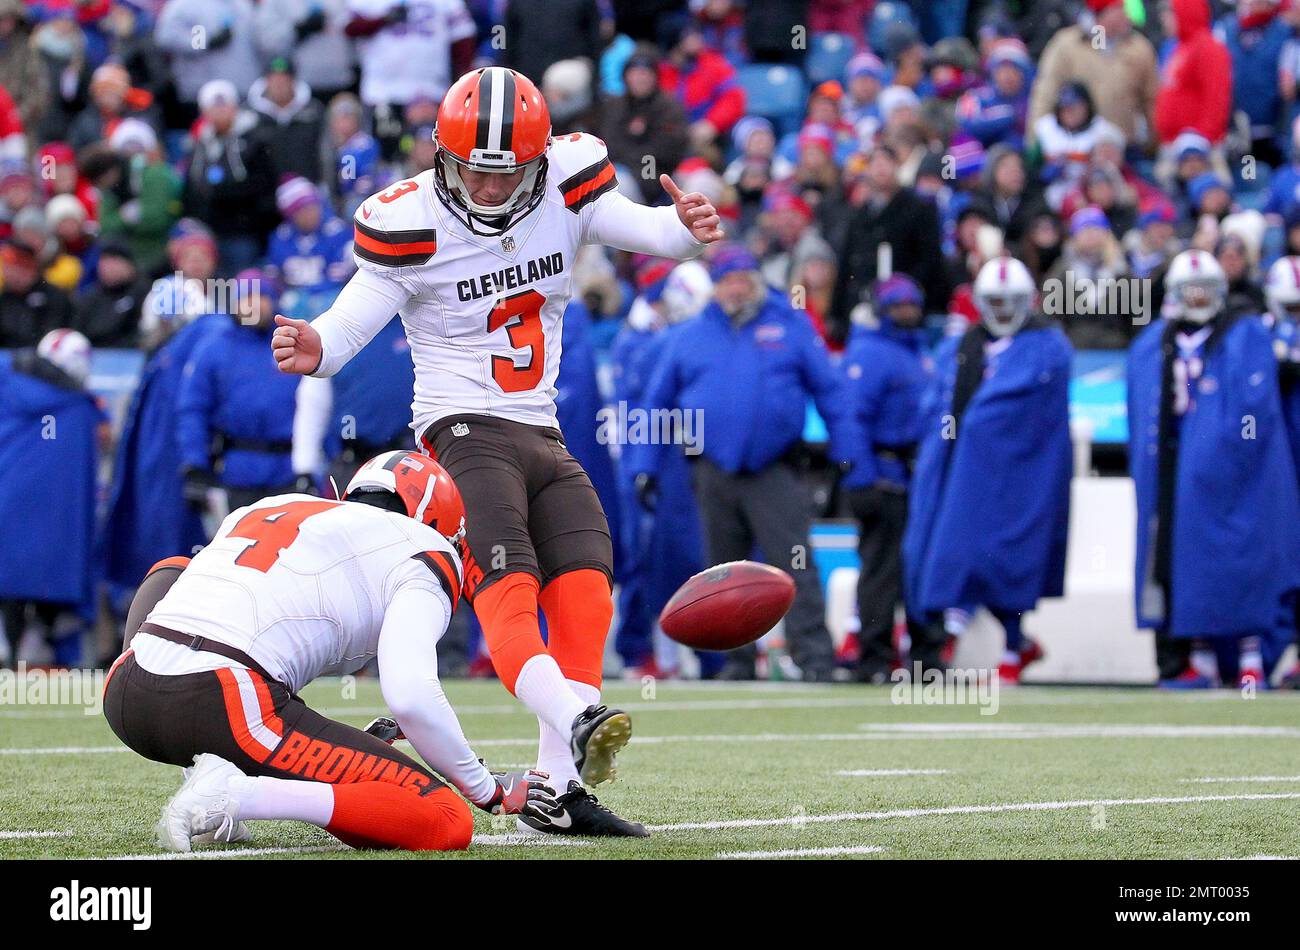 FIKE - In this Dec. 18, 2016, file photo, Cleveland Browns kicker